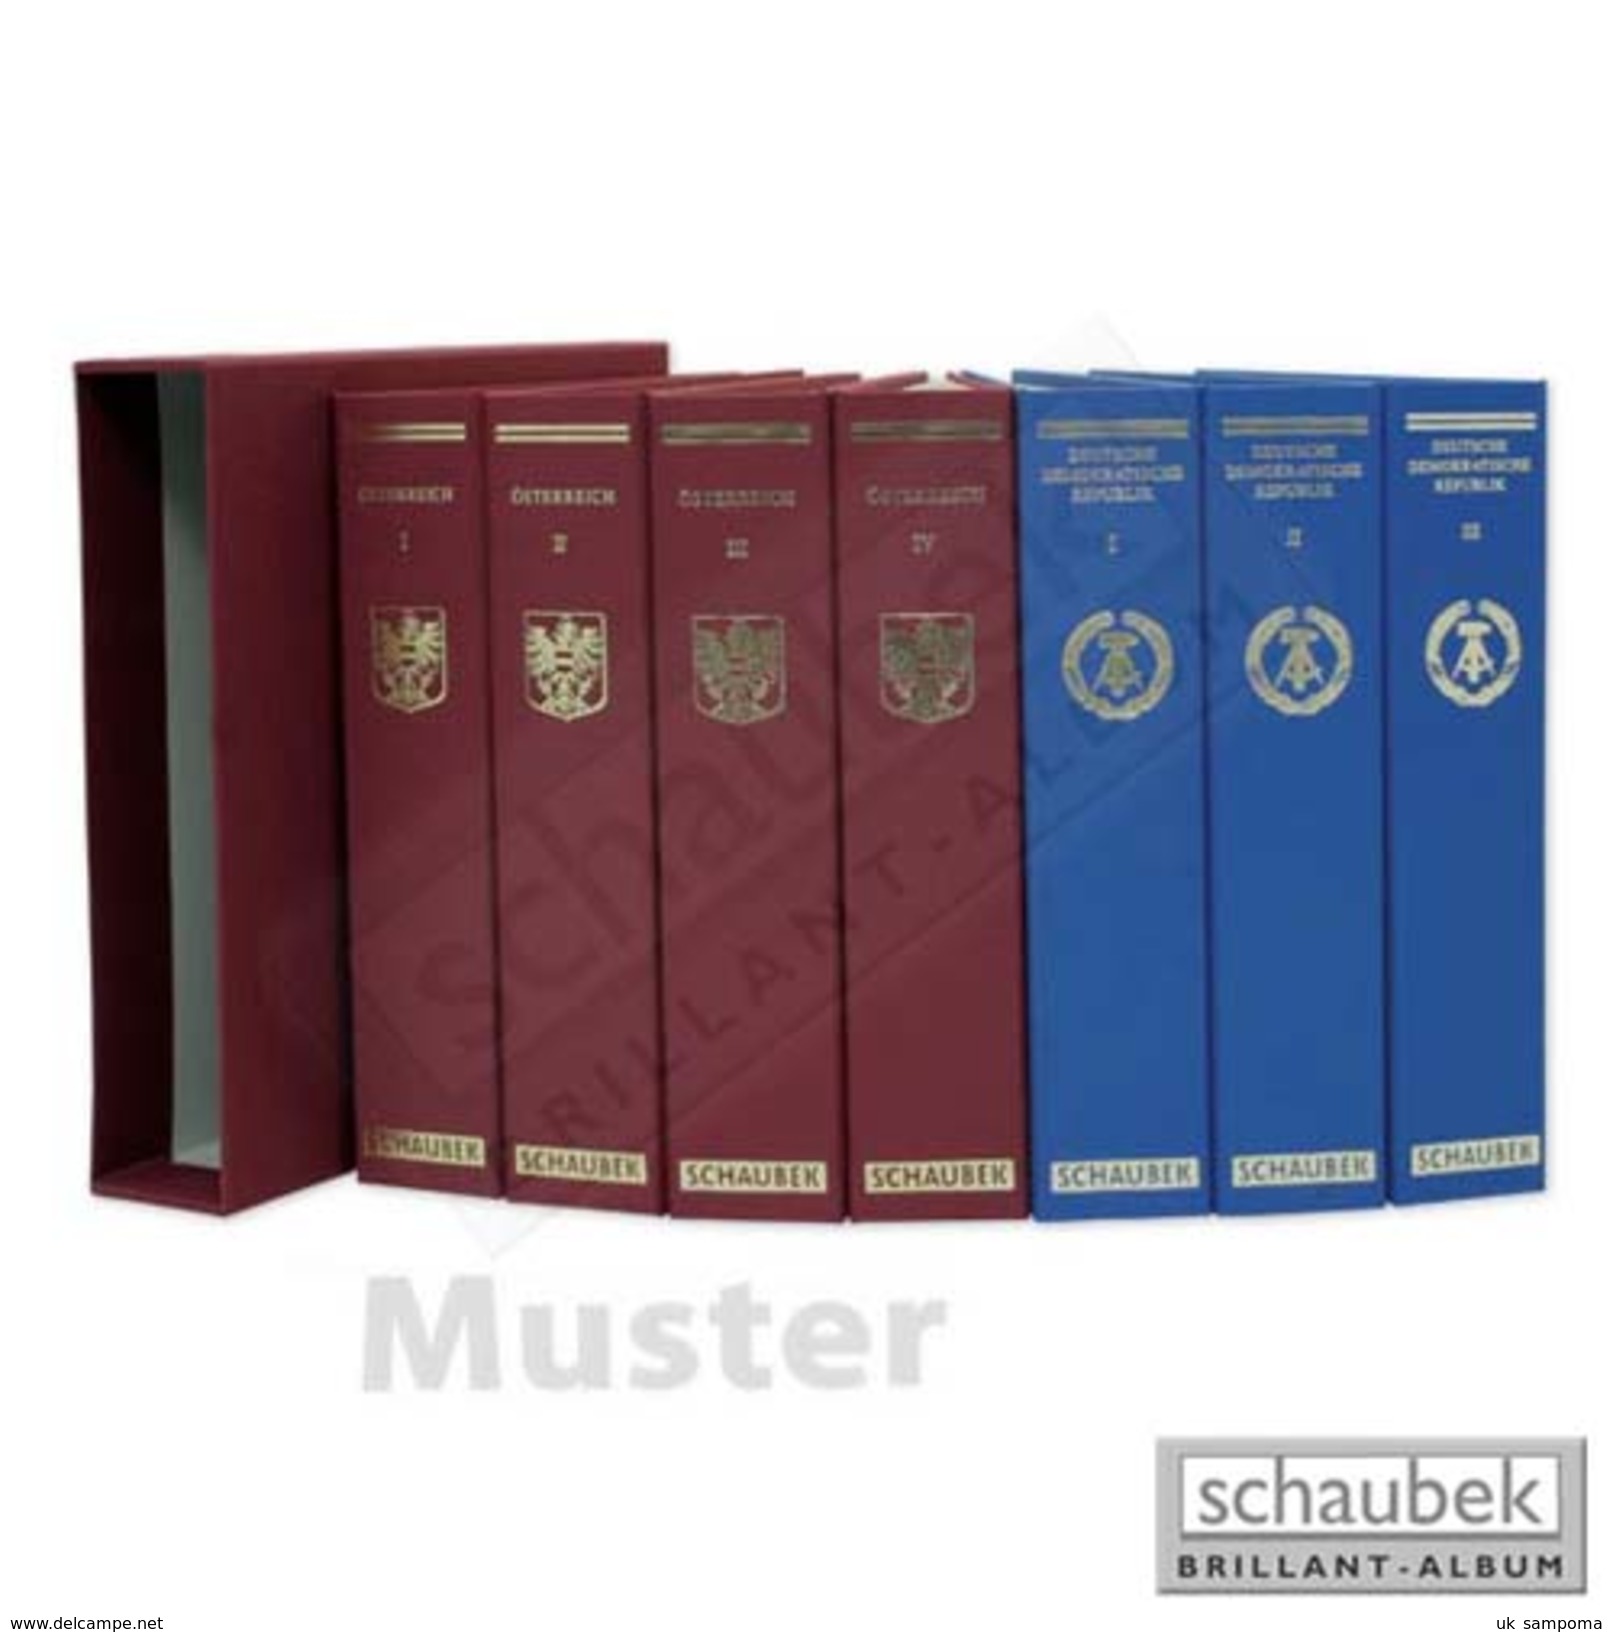 Schaubek A-845/03B Album Sweden 1990-2009 Brillant, In A Blue Screw Post Binder, Vol. III, Without Slipcase - Binders With Pages